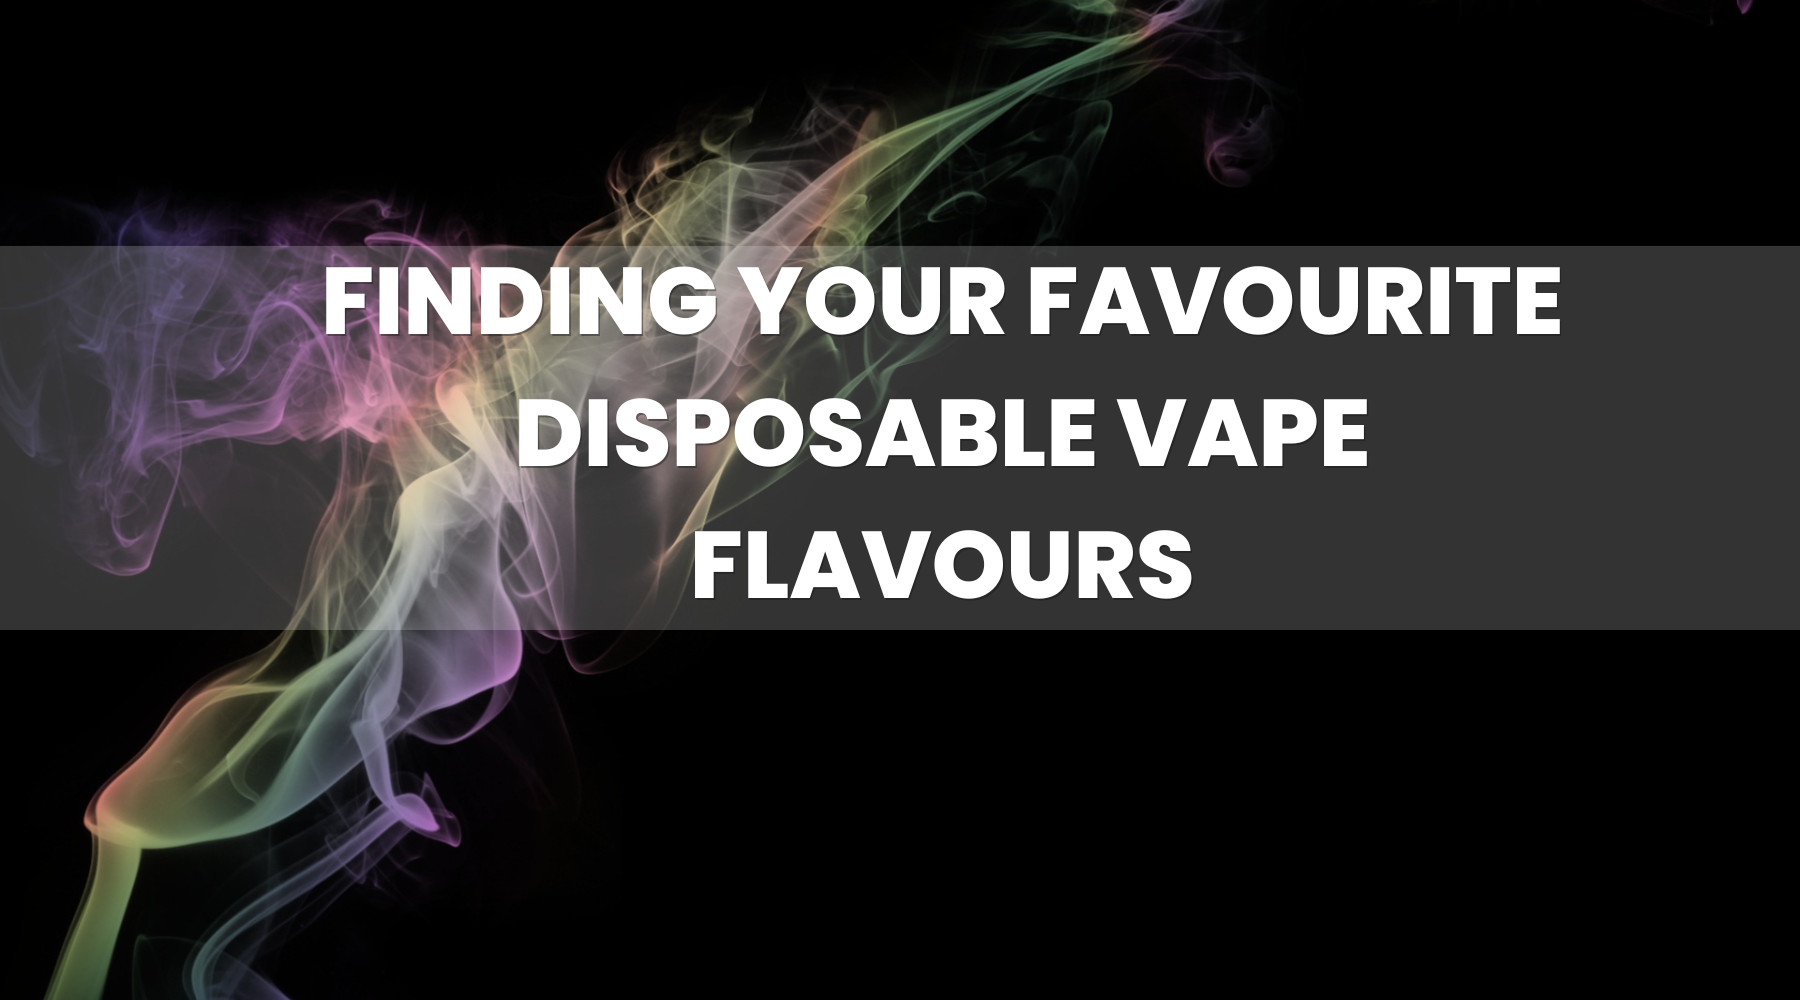 How to Find Your Favourite Disposable Vape Flavours When You Buy Your First Vape Kit?